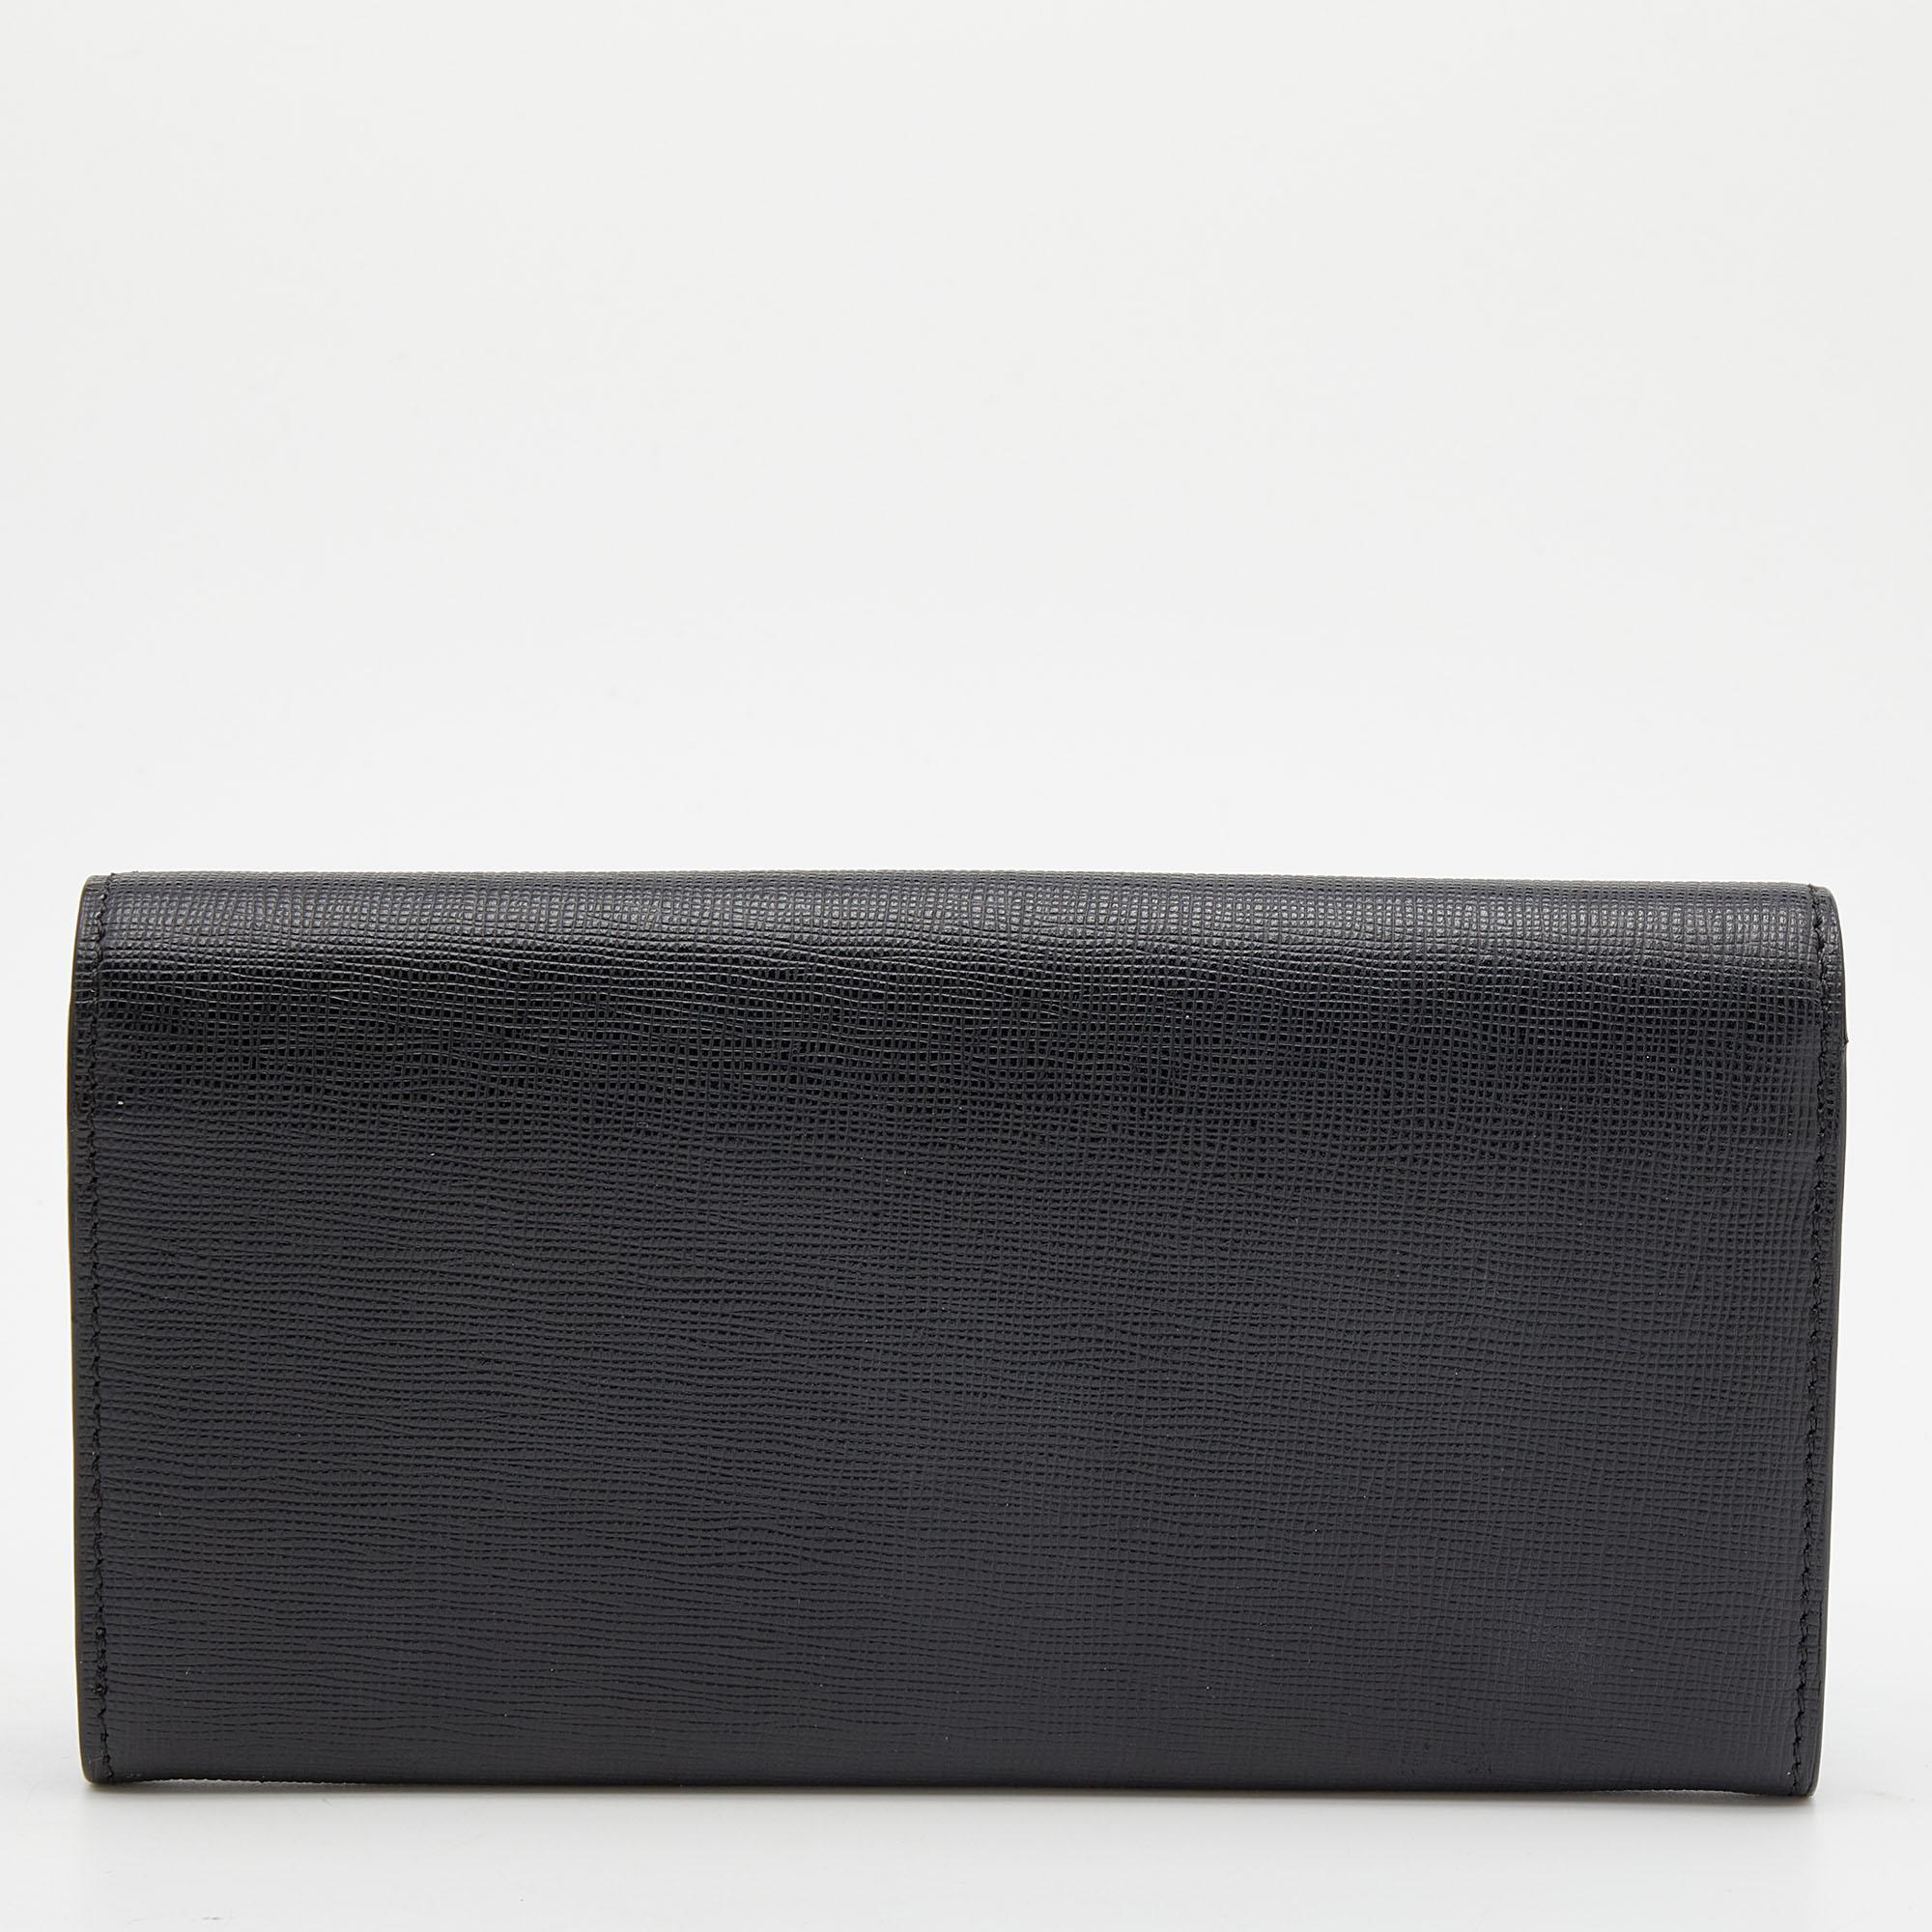 Made of black leather, this continental wallet from Fendi is a classy choice. The flap is adorned with 'Monster Eyes' and it opens to multiple card slots and a zipped pocket.

